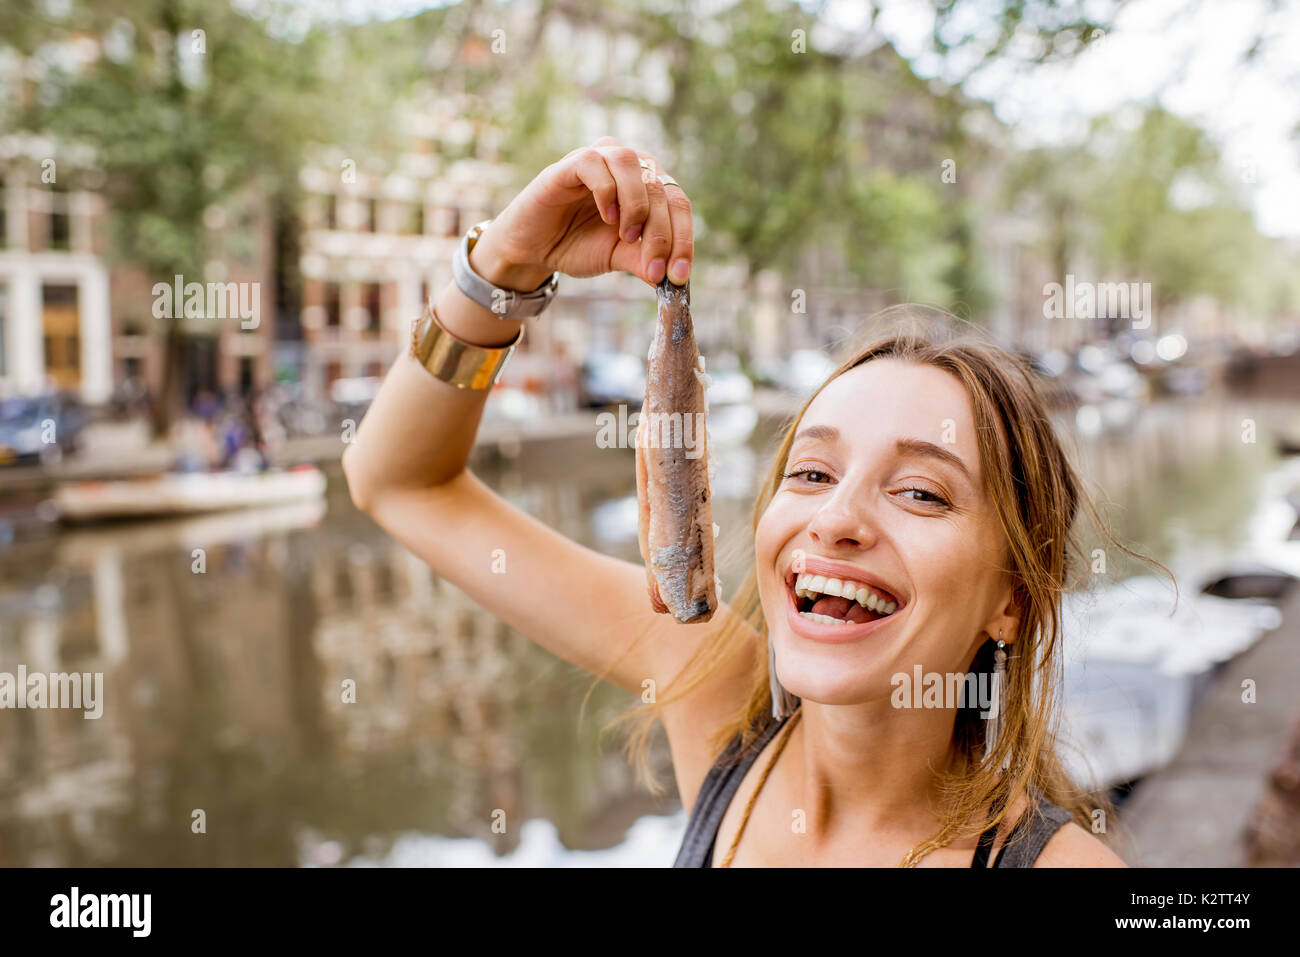 Woman with harring in Amsterdam Stock Photo